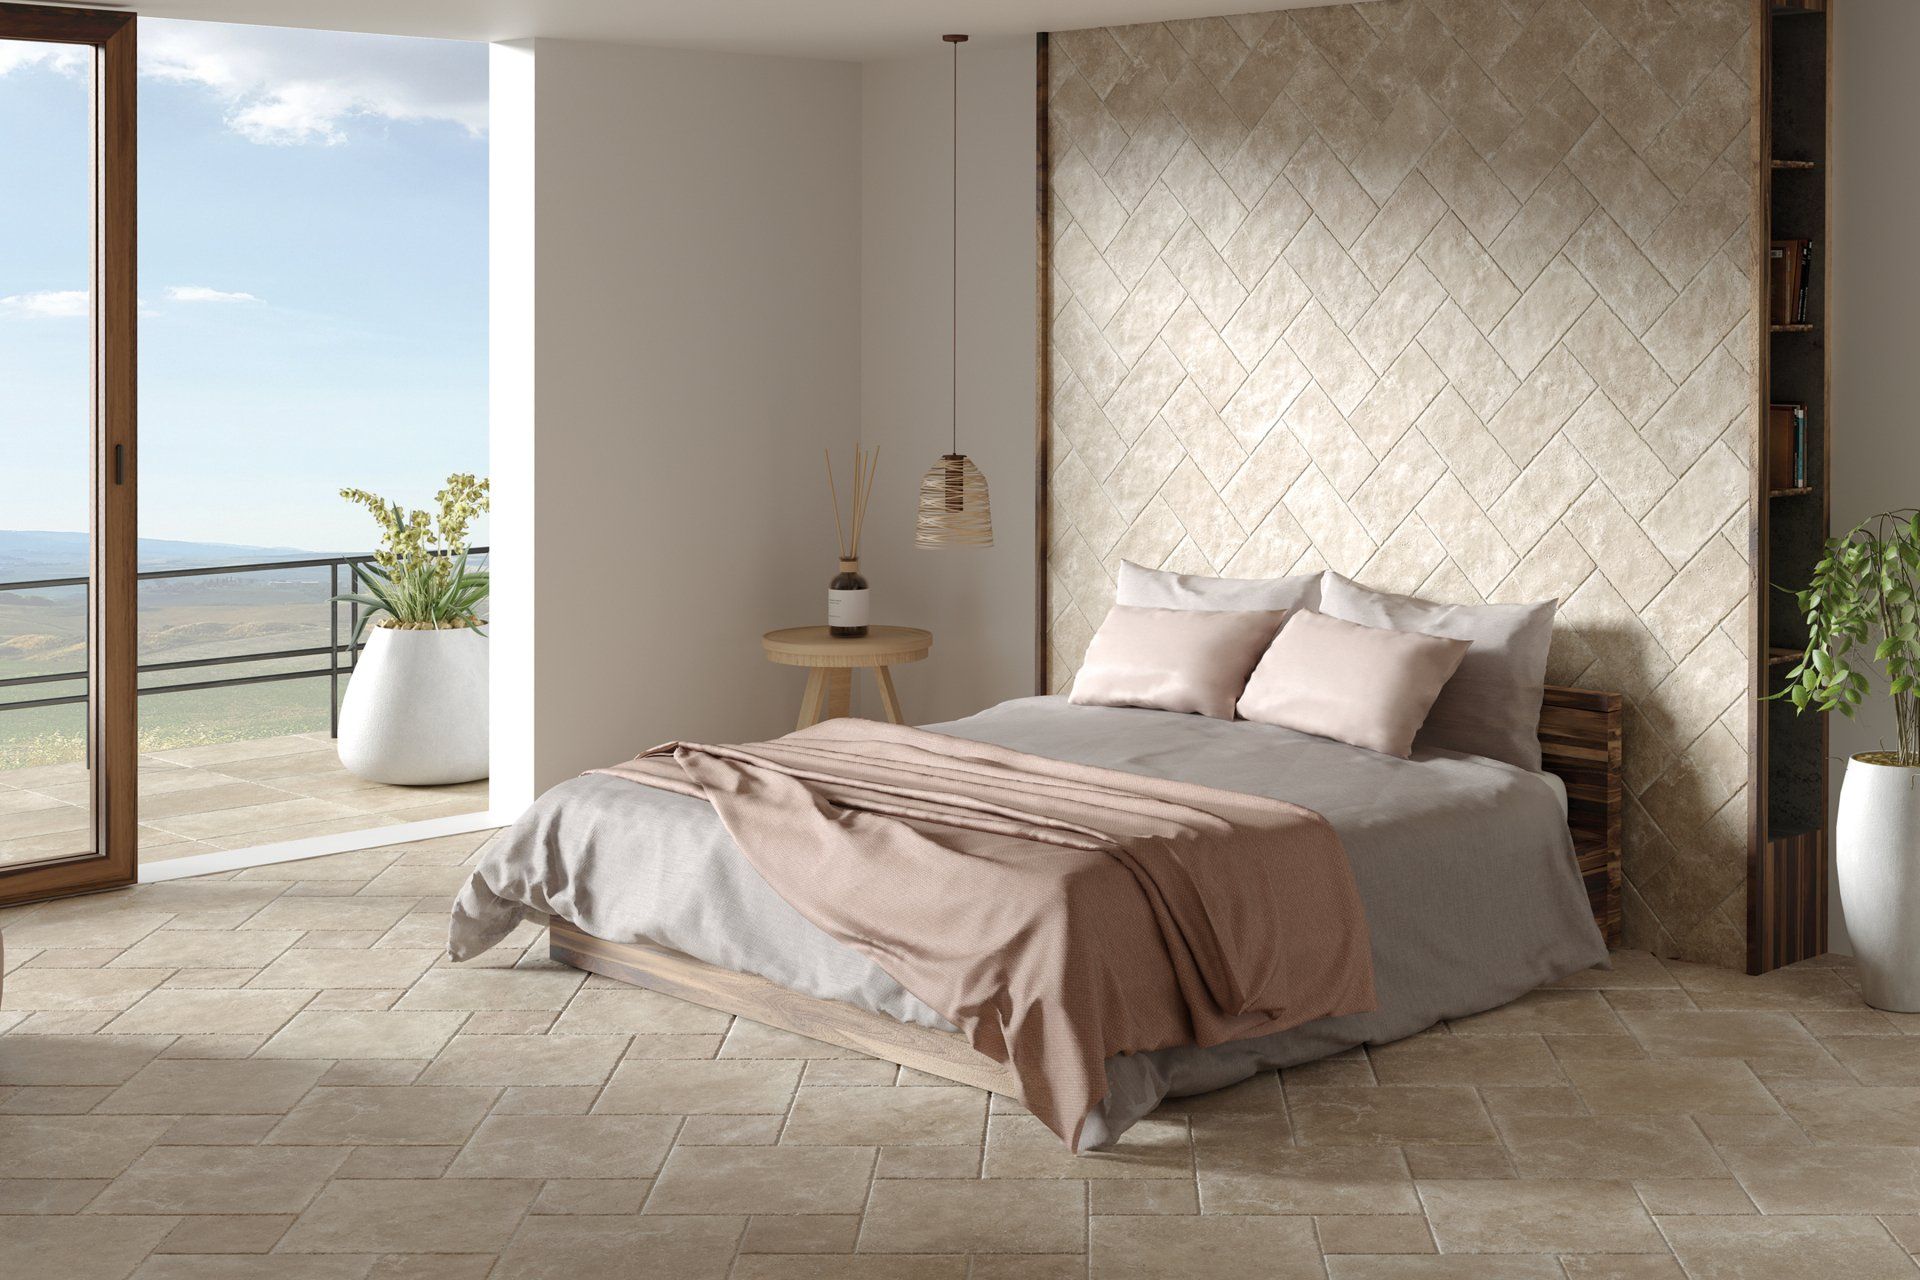 Large open bedroom with beige tile floors and matching wall